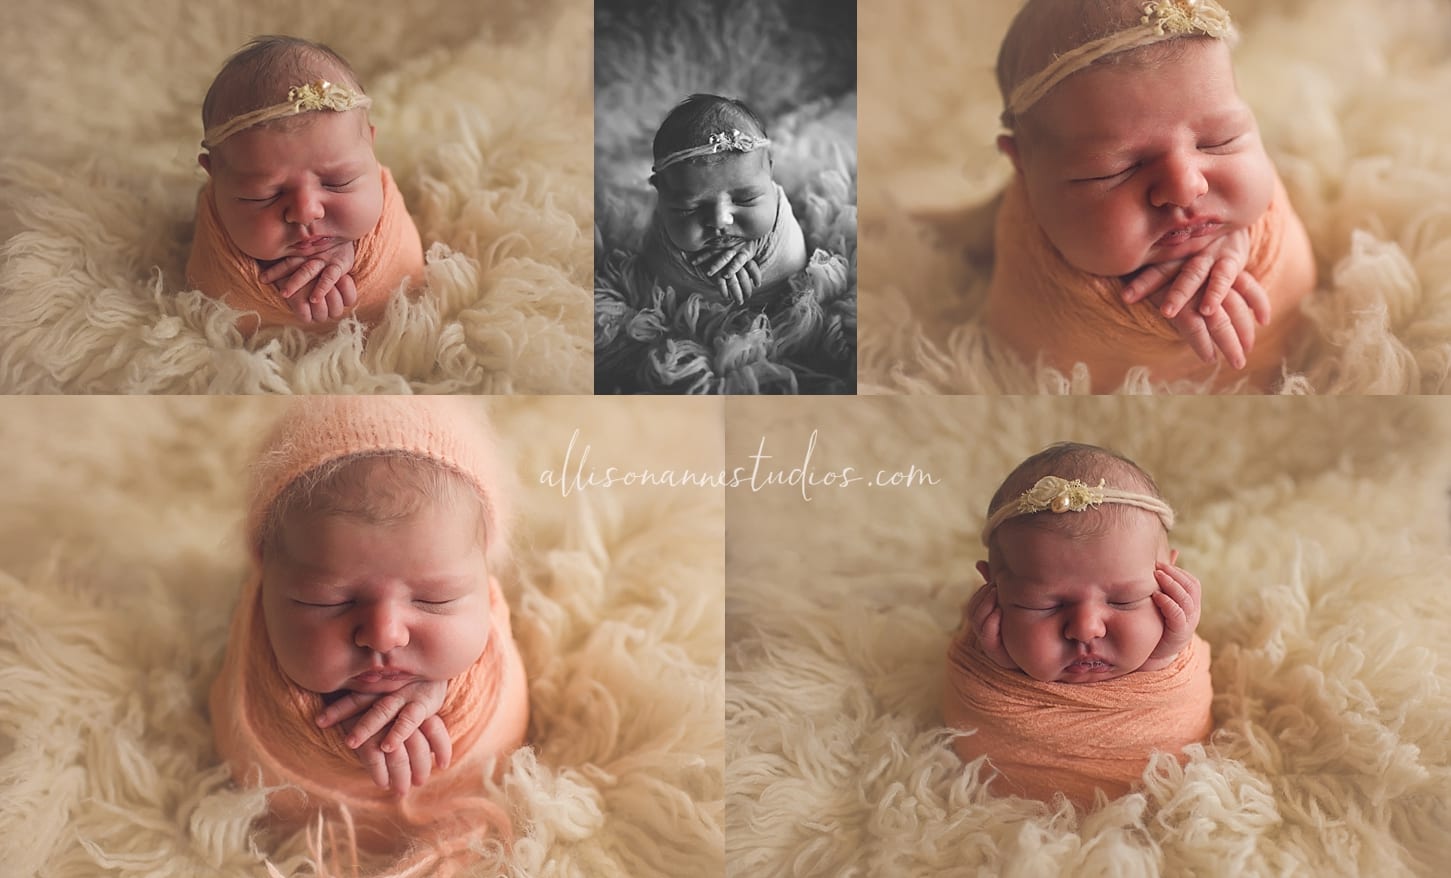 Lucy, big brother, cheeks for days, best newborn photographer in NJ, Bennett, Bit Brother, little sister, milk bubbles, black and white photography, Allison Anne Studios, Allison Gallagher, love, Hammonton, studio sessions 